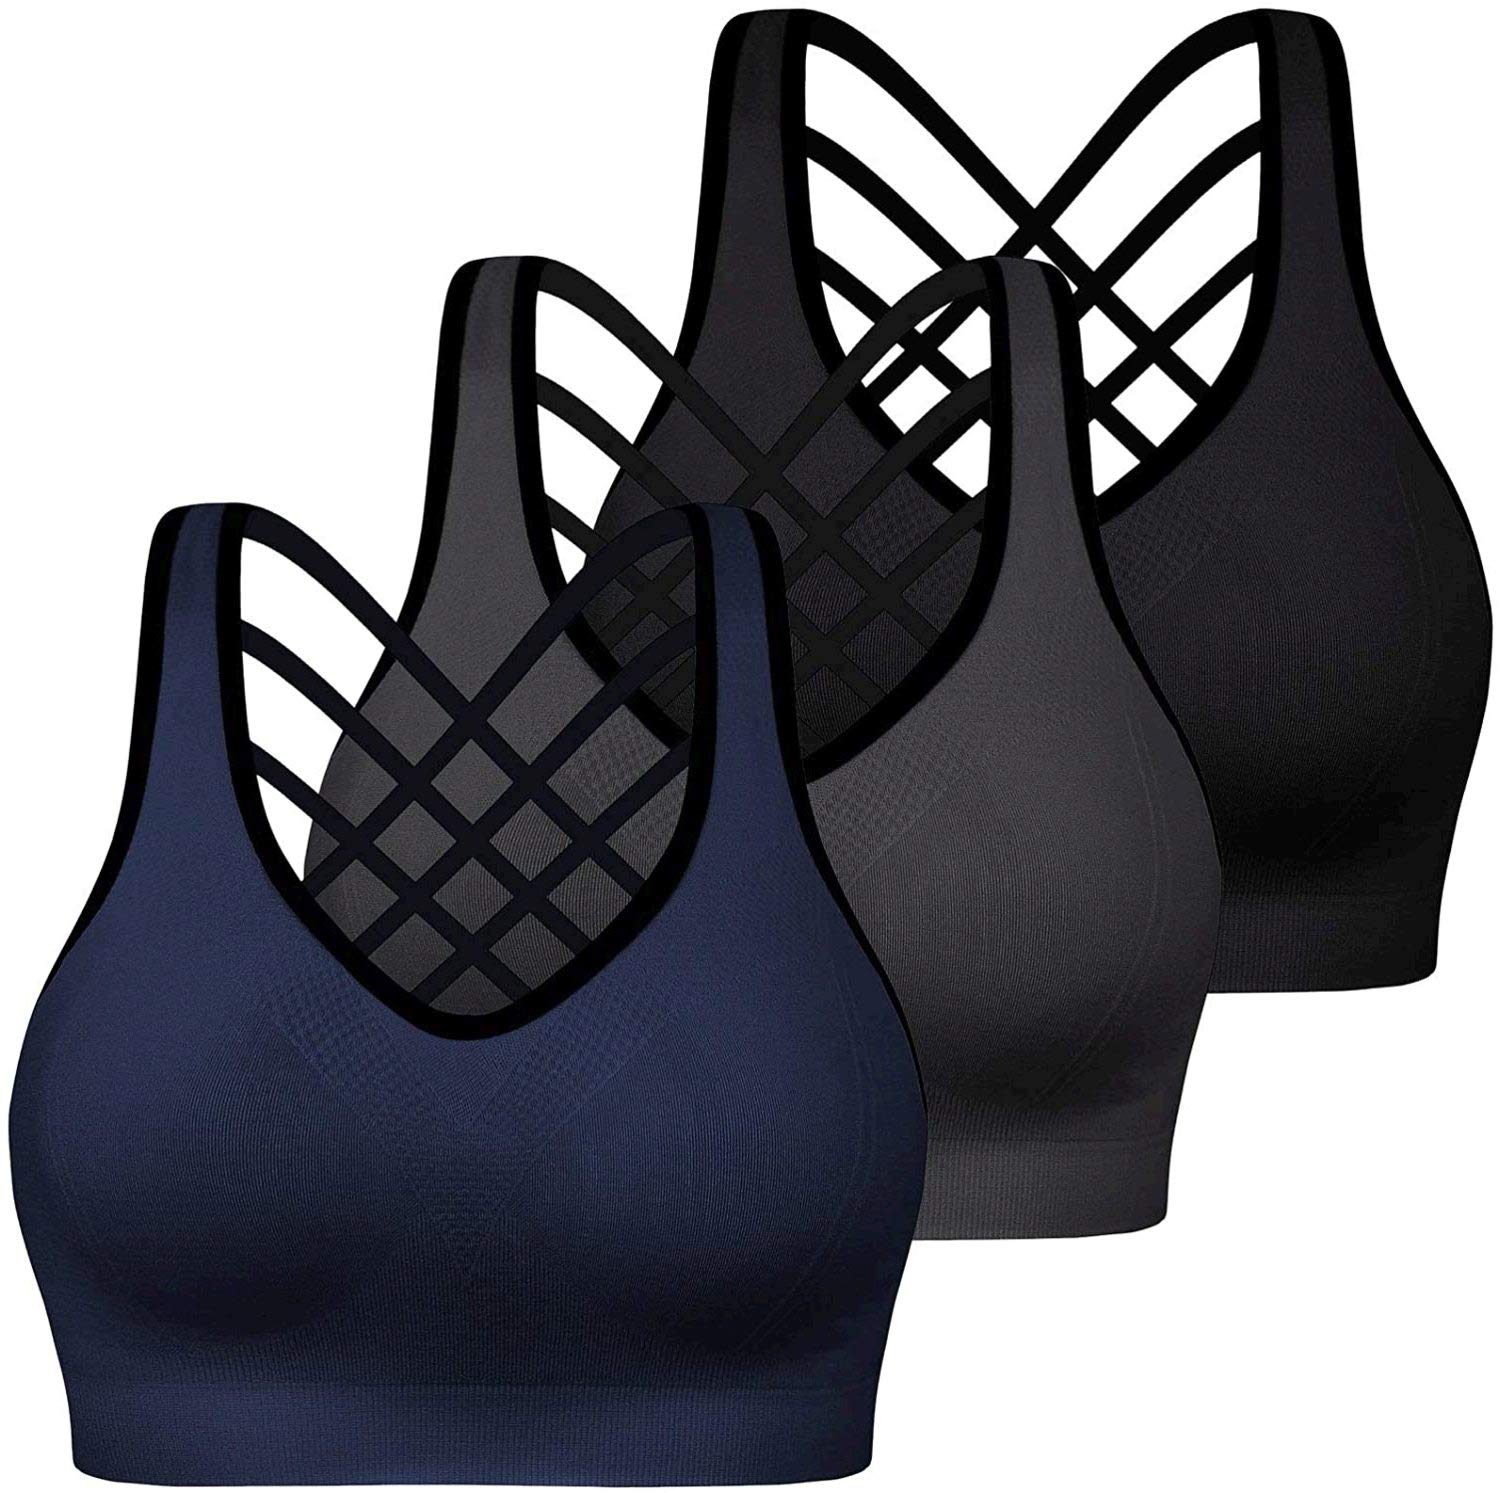 Racerback Sports Bras for Women with Pads - 4 Pack High Impact